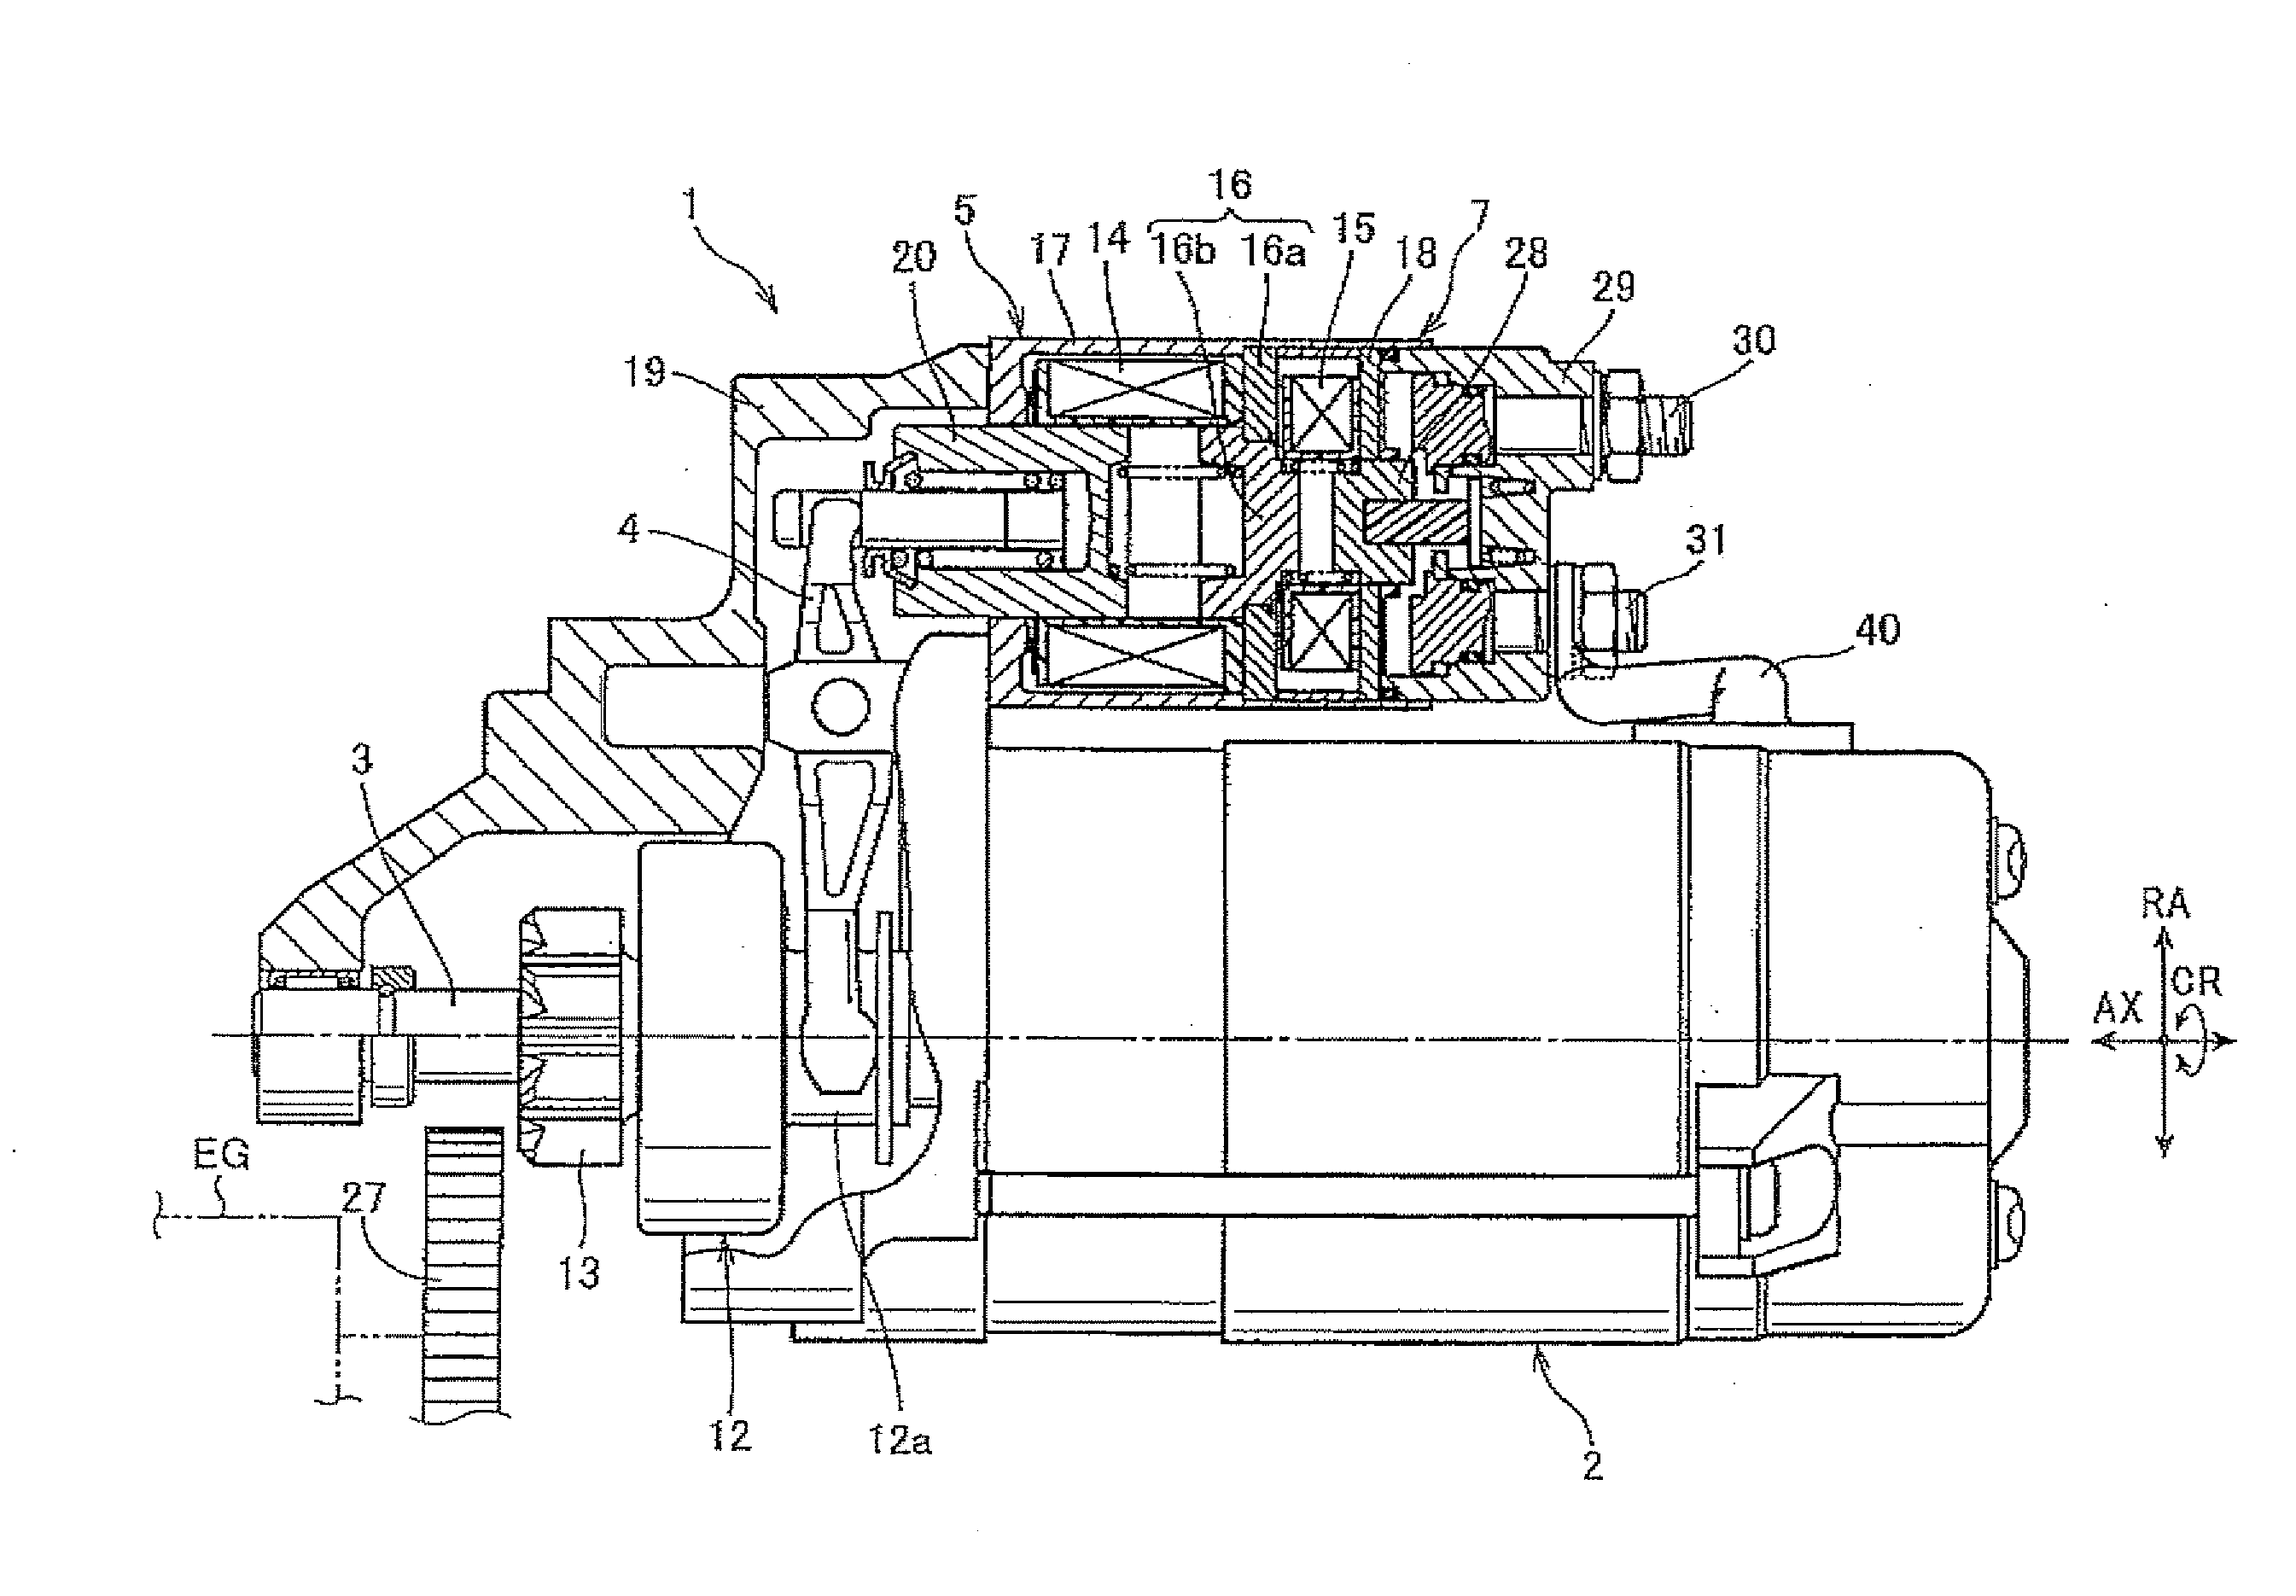 Apparatus for starting engine mounted on-vehicle